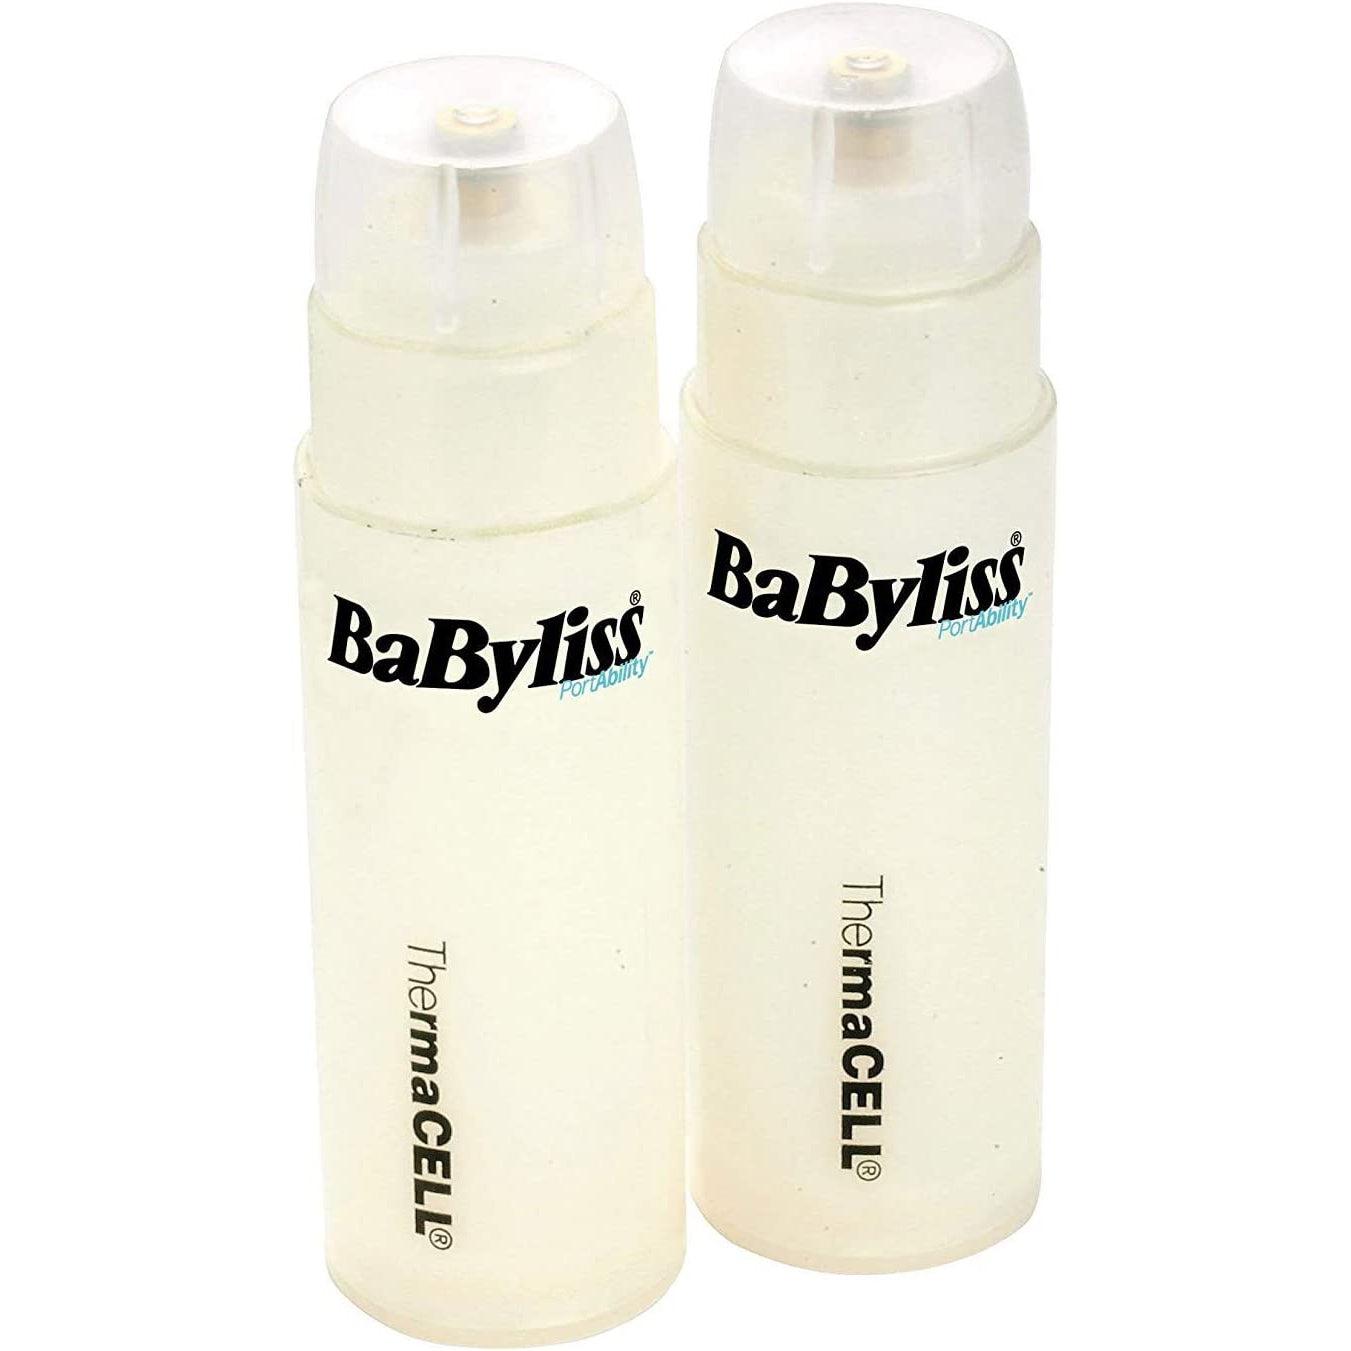 BaByliss Gas Refill Cartridges - 2 Pack - Healthxpress.ie